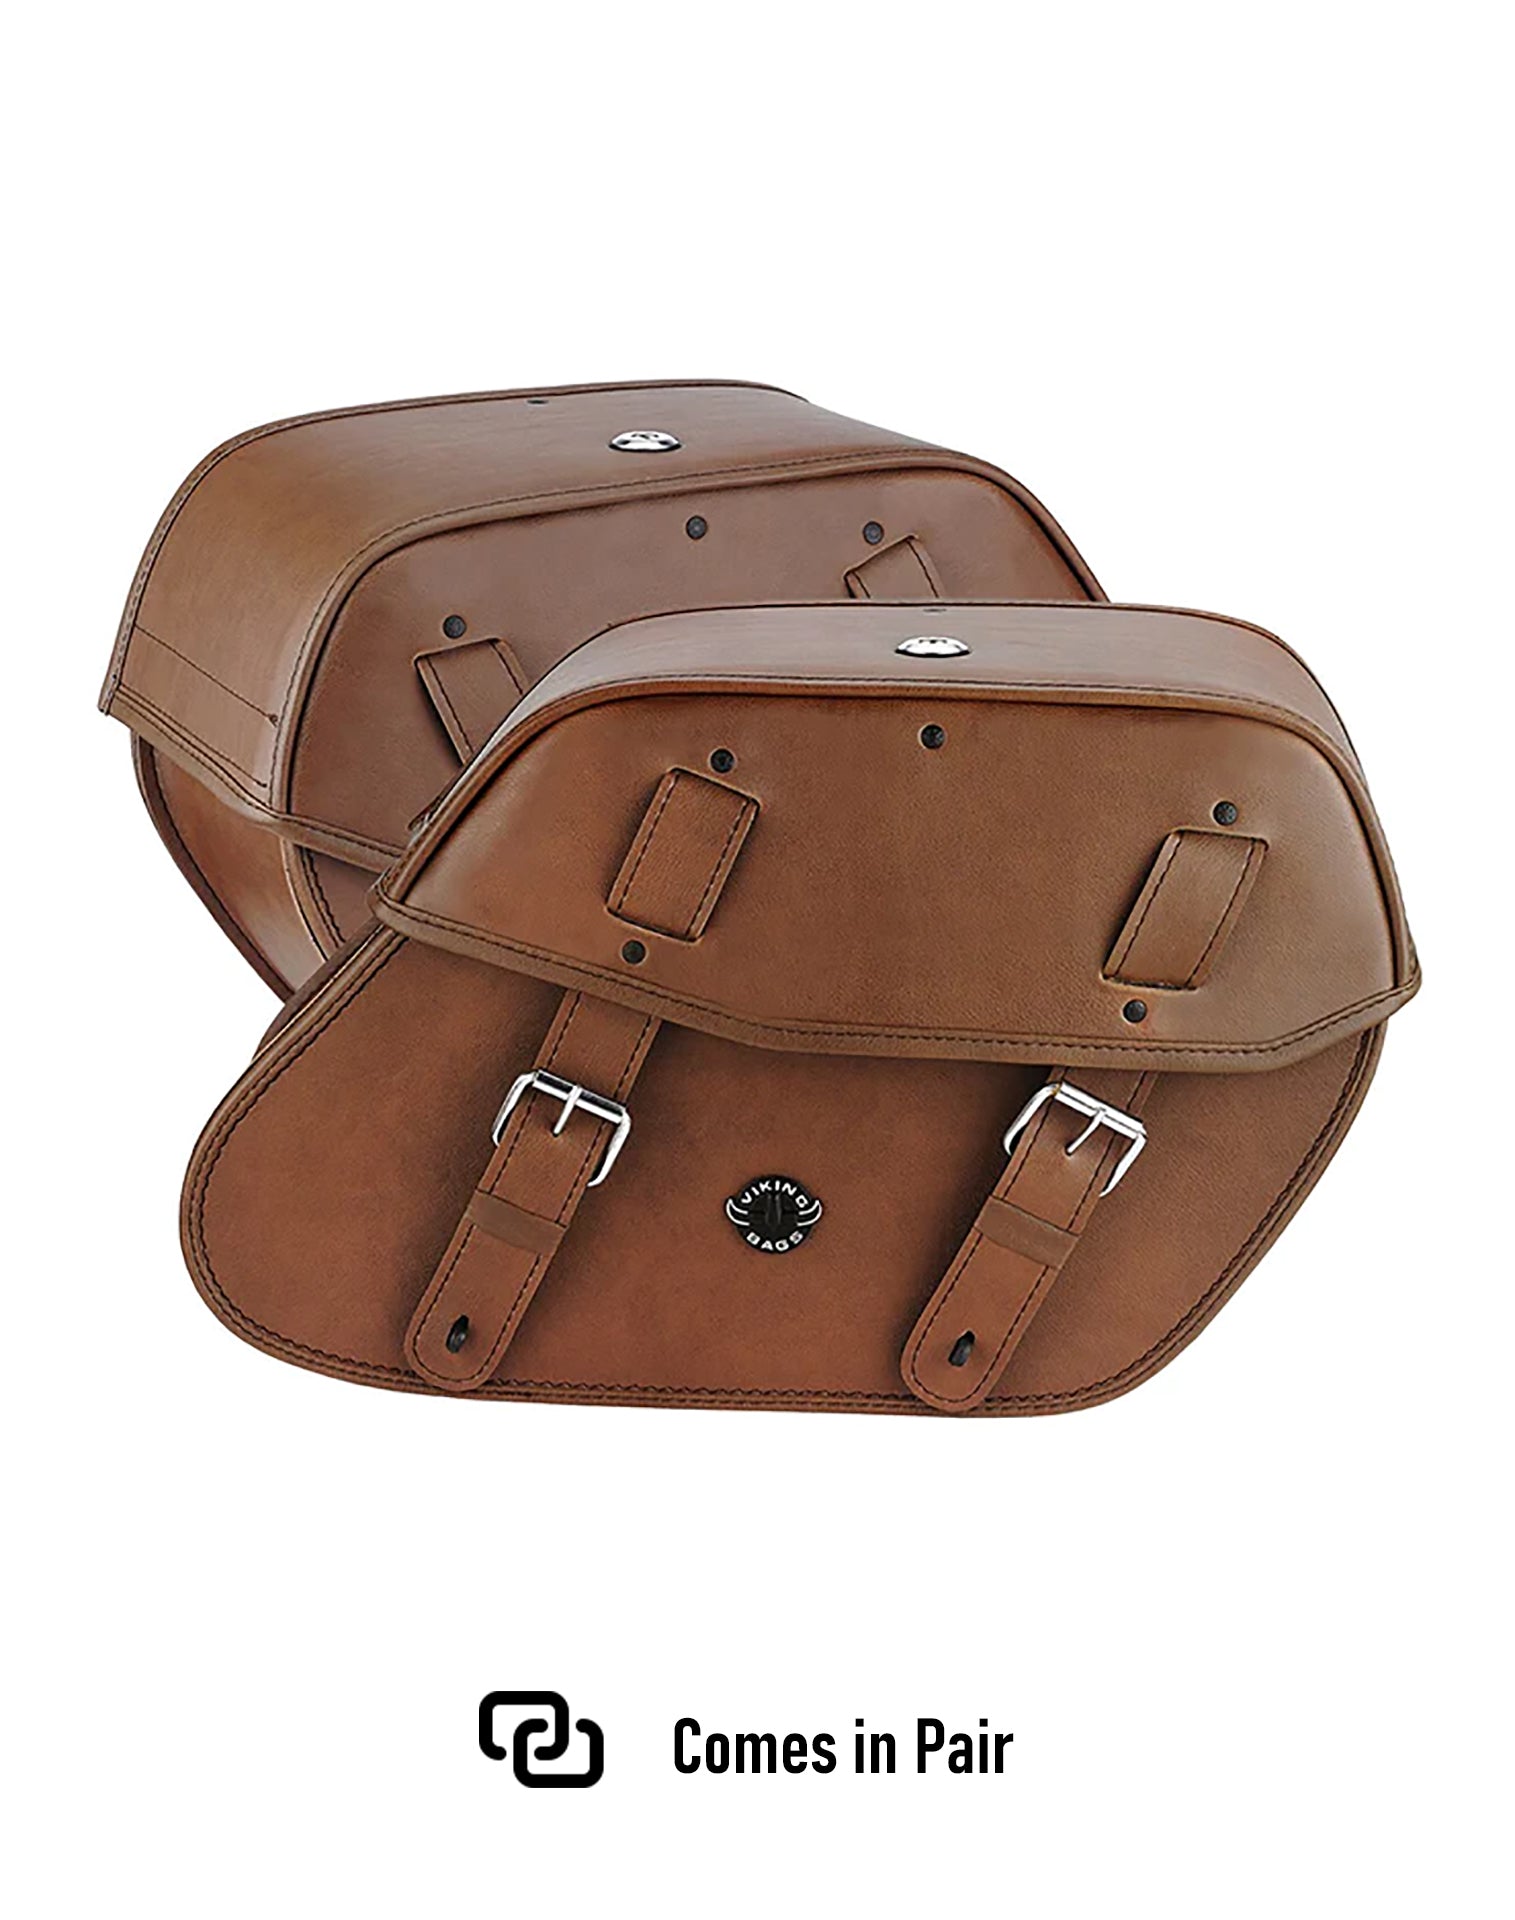 Viking Odin Brown Large Honda Vtx 1800 F Leather Motorcycle Saddlebags Weather Resistant Bags Comes in Pair